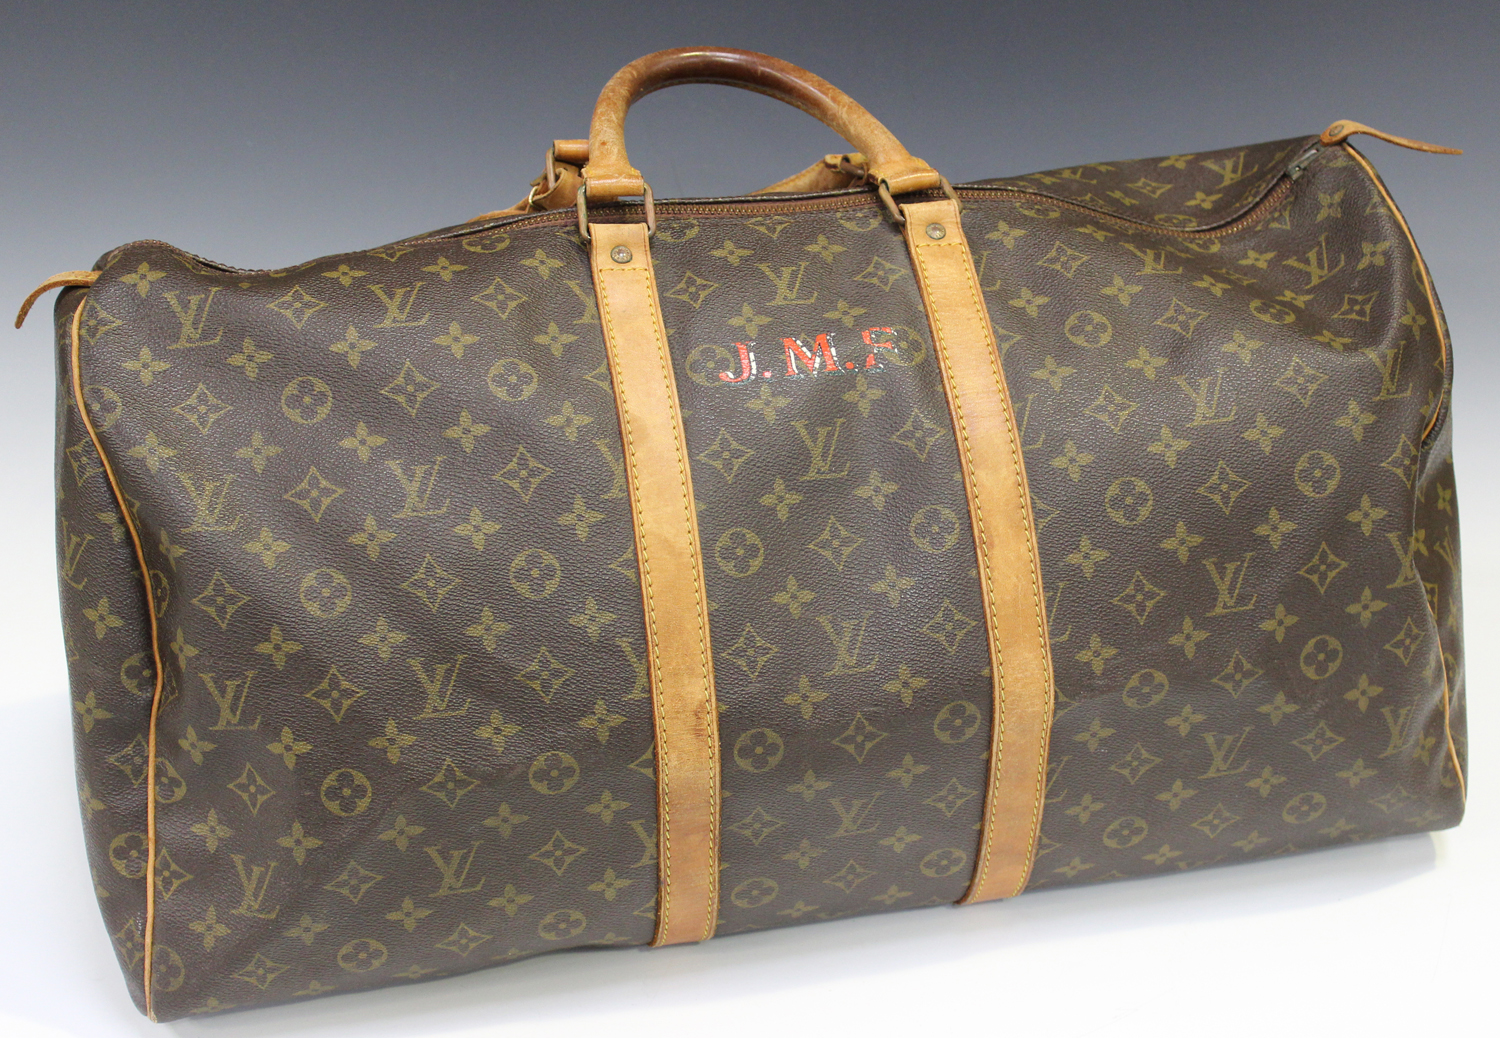 A Louis Vuitton Keepall 55, the monogram canvas body with tan leather trimming and handles, length 5